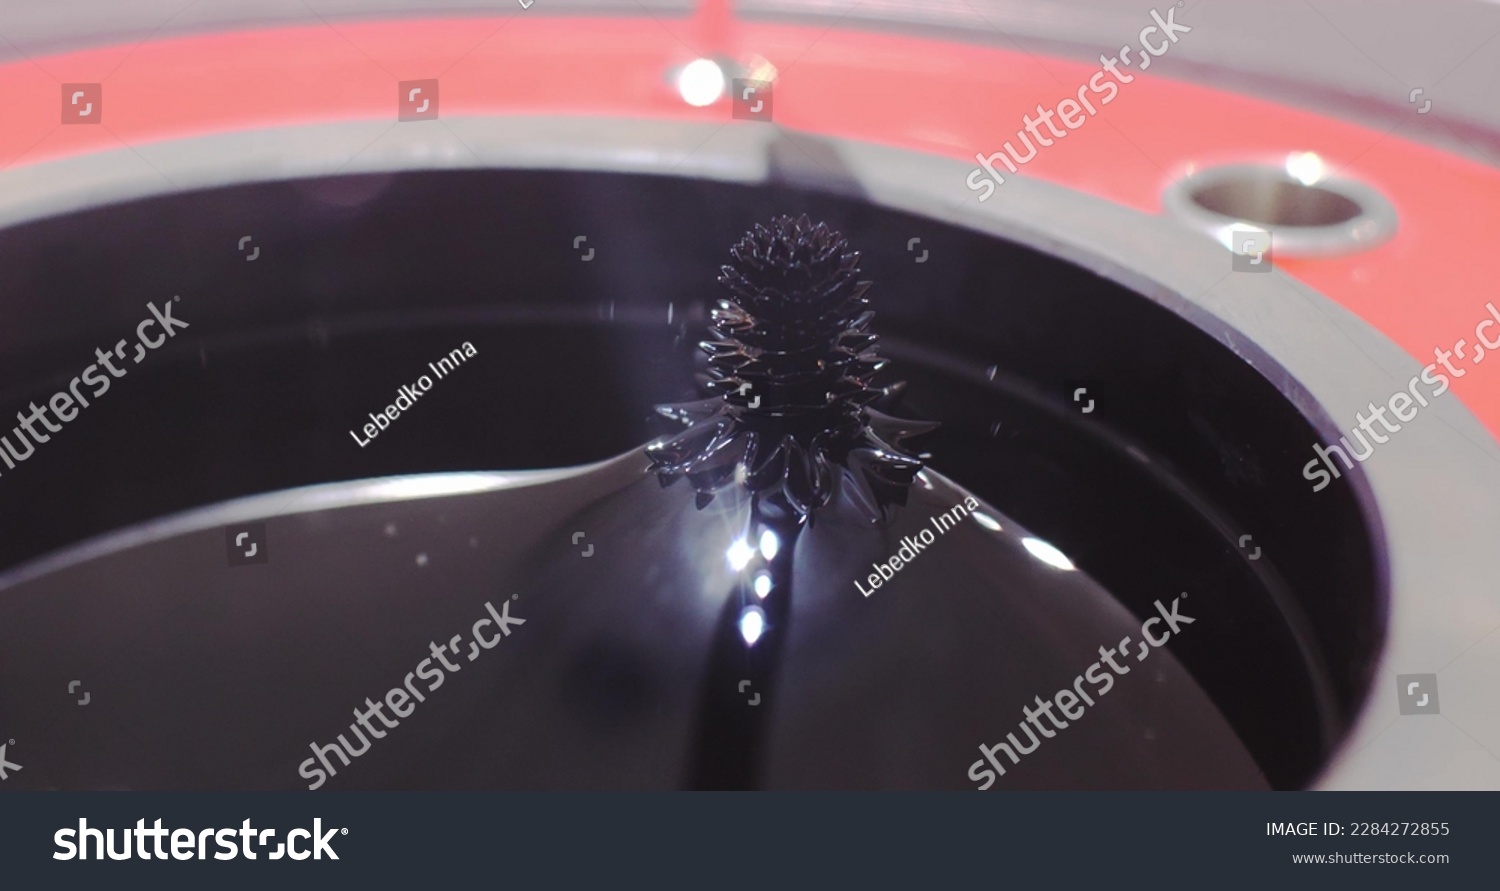 Experiment on the movement of a ferromagnetic black liquid under the action of a magnetic field. Ferrofluid takes on bizarre sharp shapes under the influence of a magnetic field. #2284272855